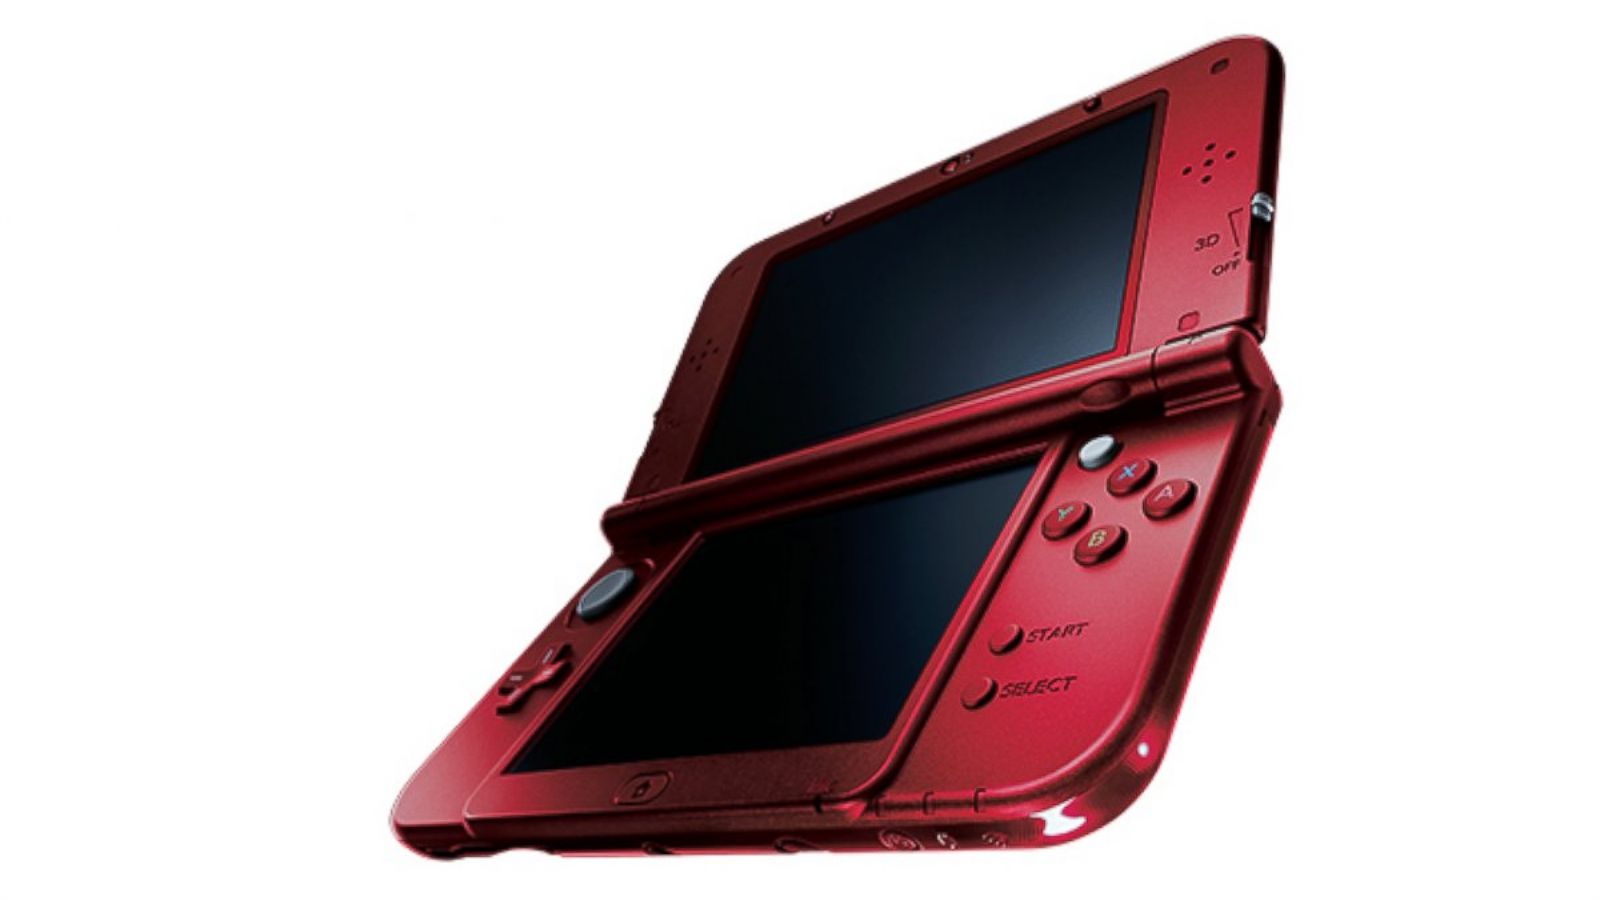 A model shows a Nintendo DSi, the revamped version of Nintendo's